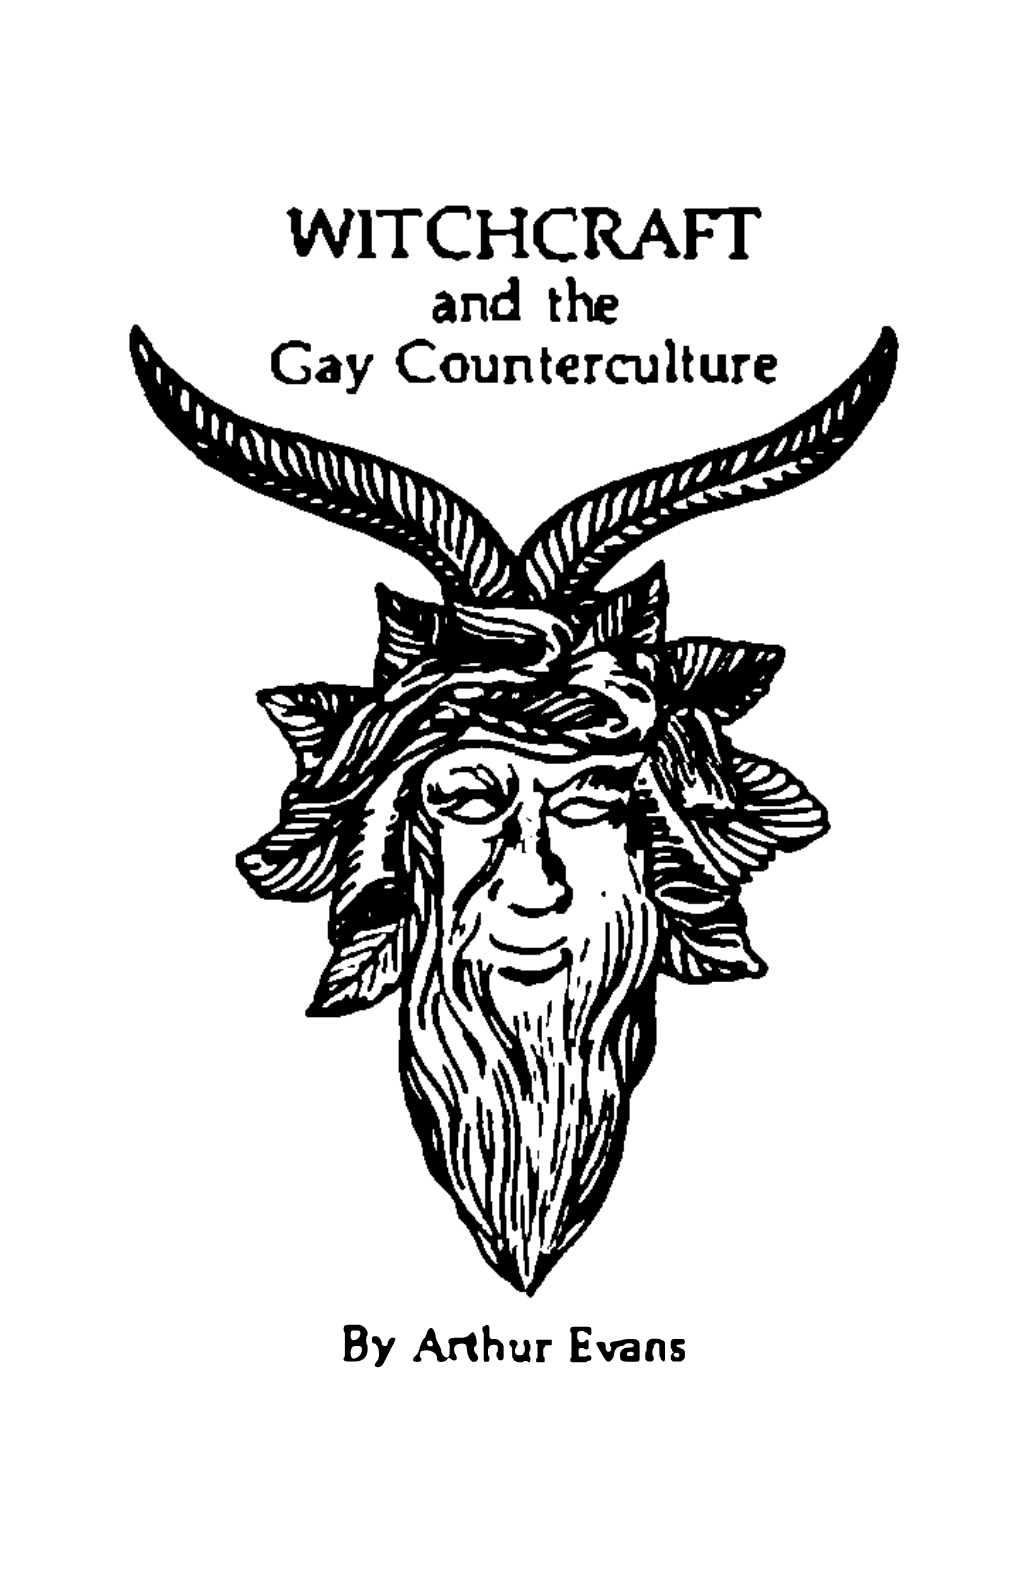 Witchcraft and the Gay Counterculture Is in Every Way an Underground Endeavor